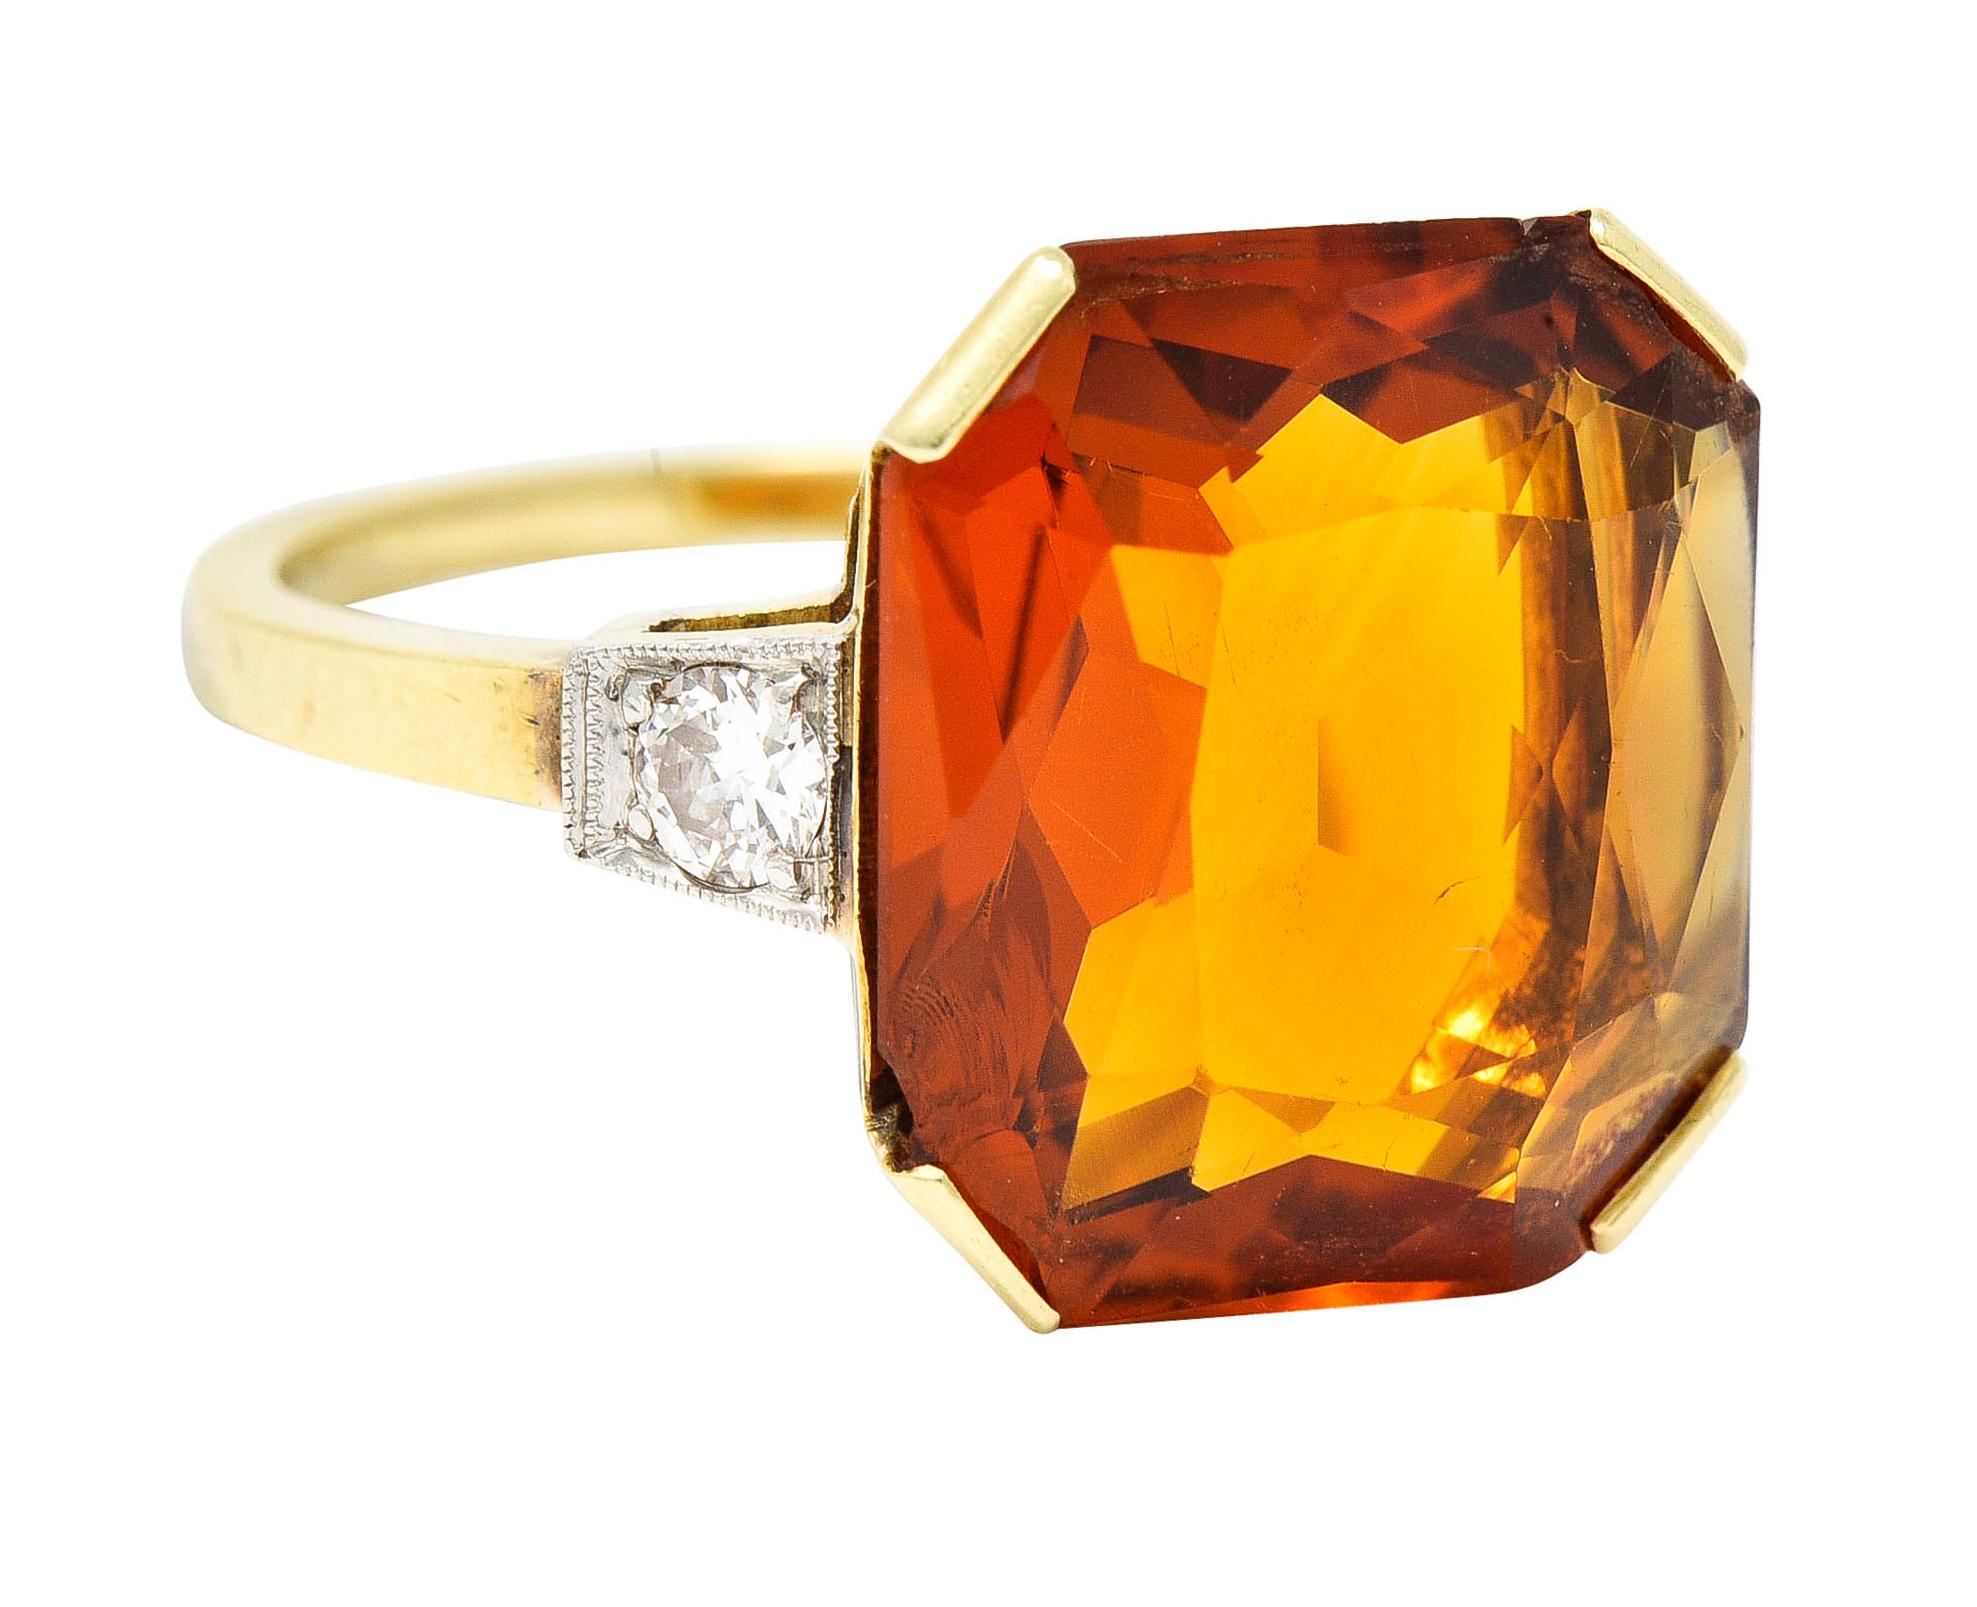 Ring centers a cushion cut citrine measuring approximately 13.0 x 14.0 mm

Transparent and deeply saturated orange 

With minor conchoidal fracture concealed by wide prongs

Flanked by two old European cut diamonds bead set in platinum

Weighing